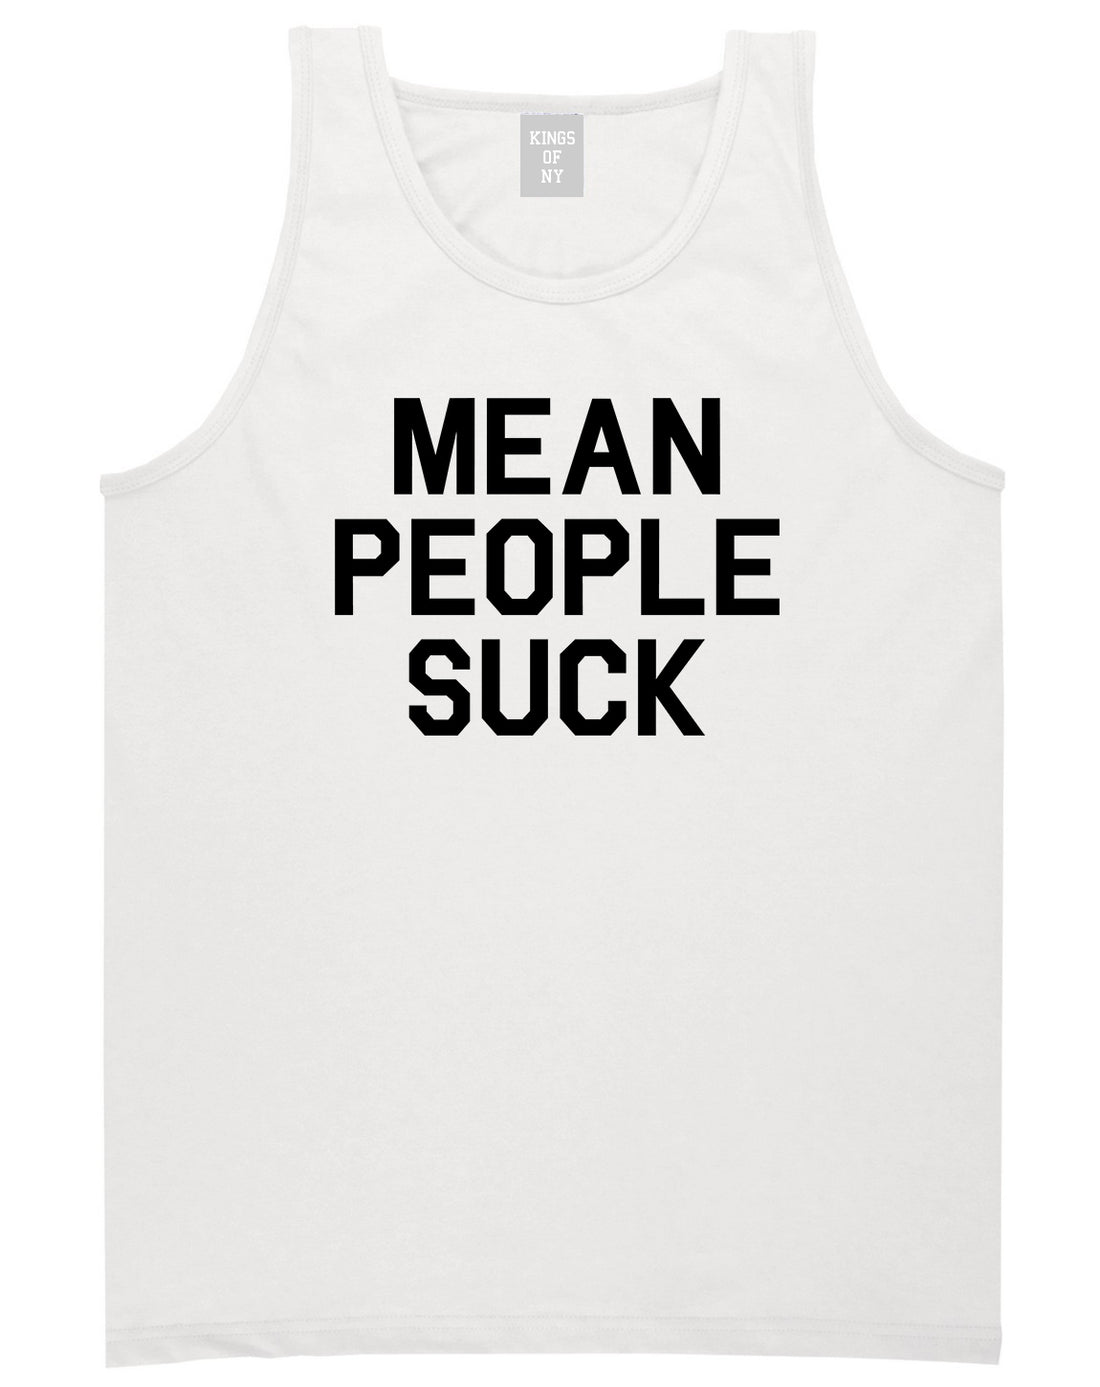 Mean People Suck Mens Tank Top Shirt White by Kings Of NY